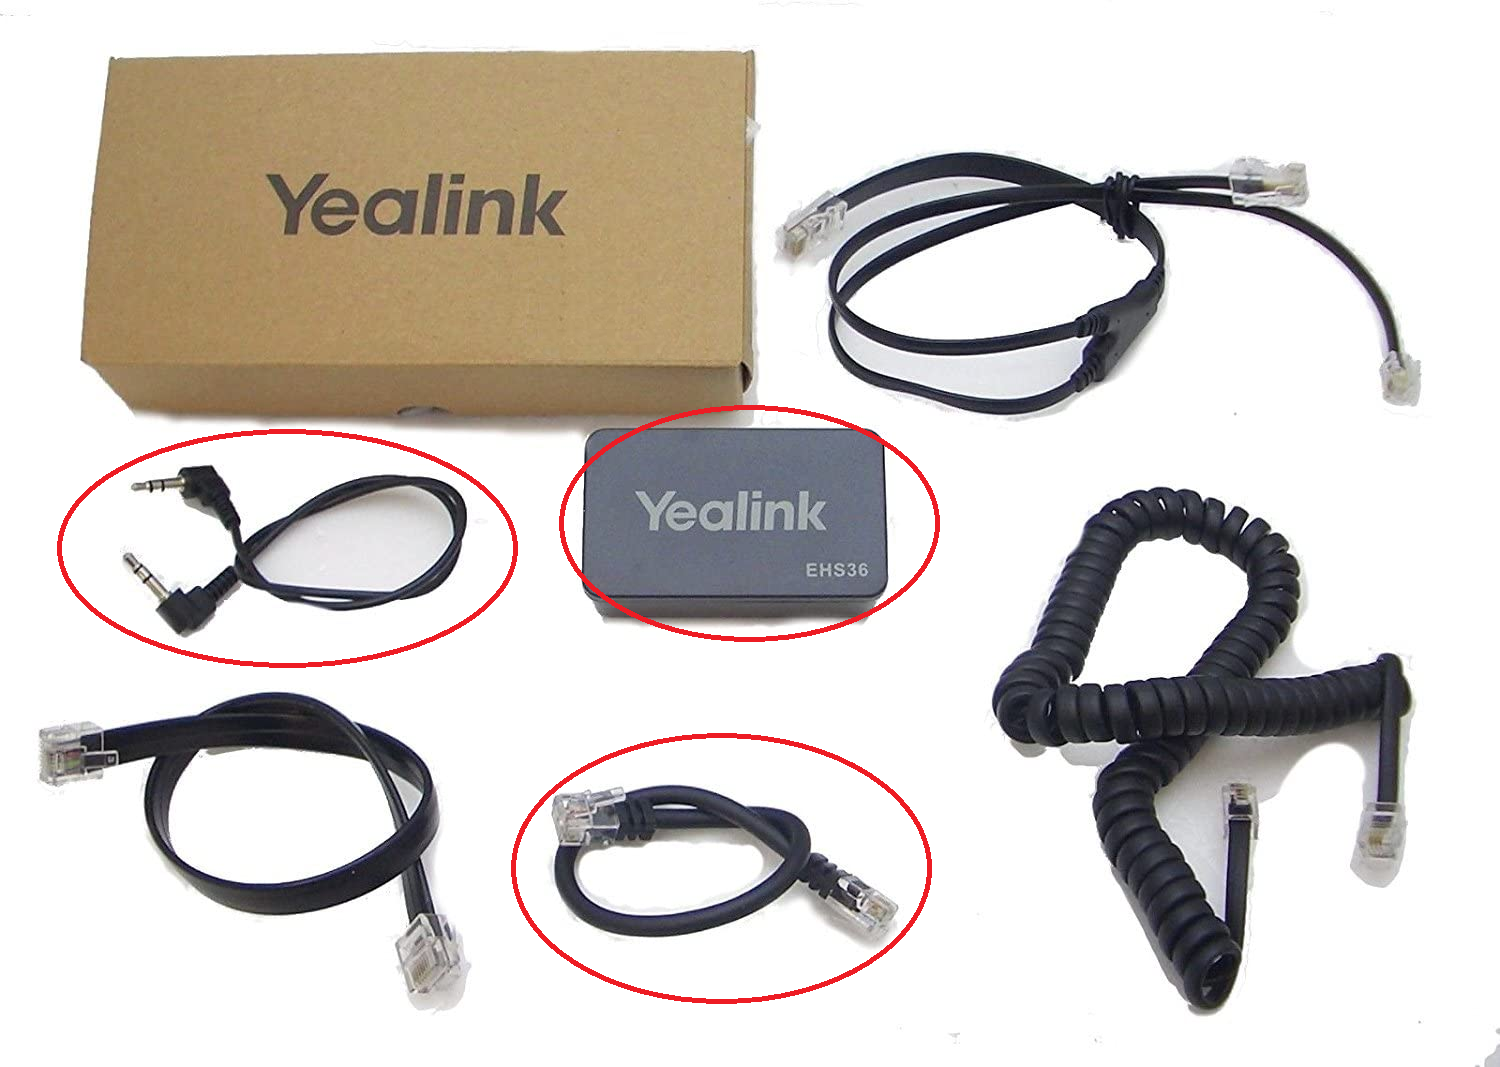 Yealink EHS36 cords and adapter box for Plantronics